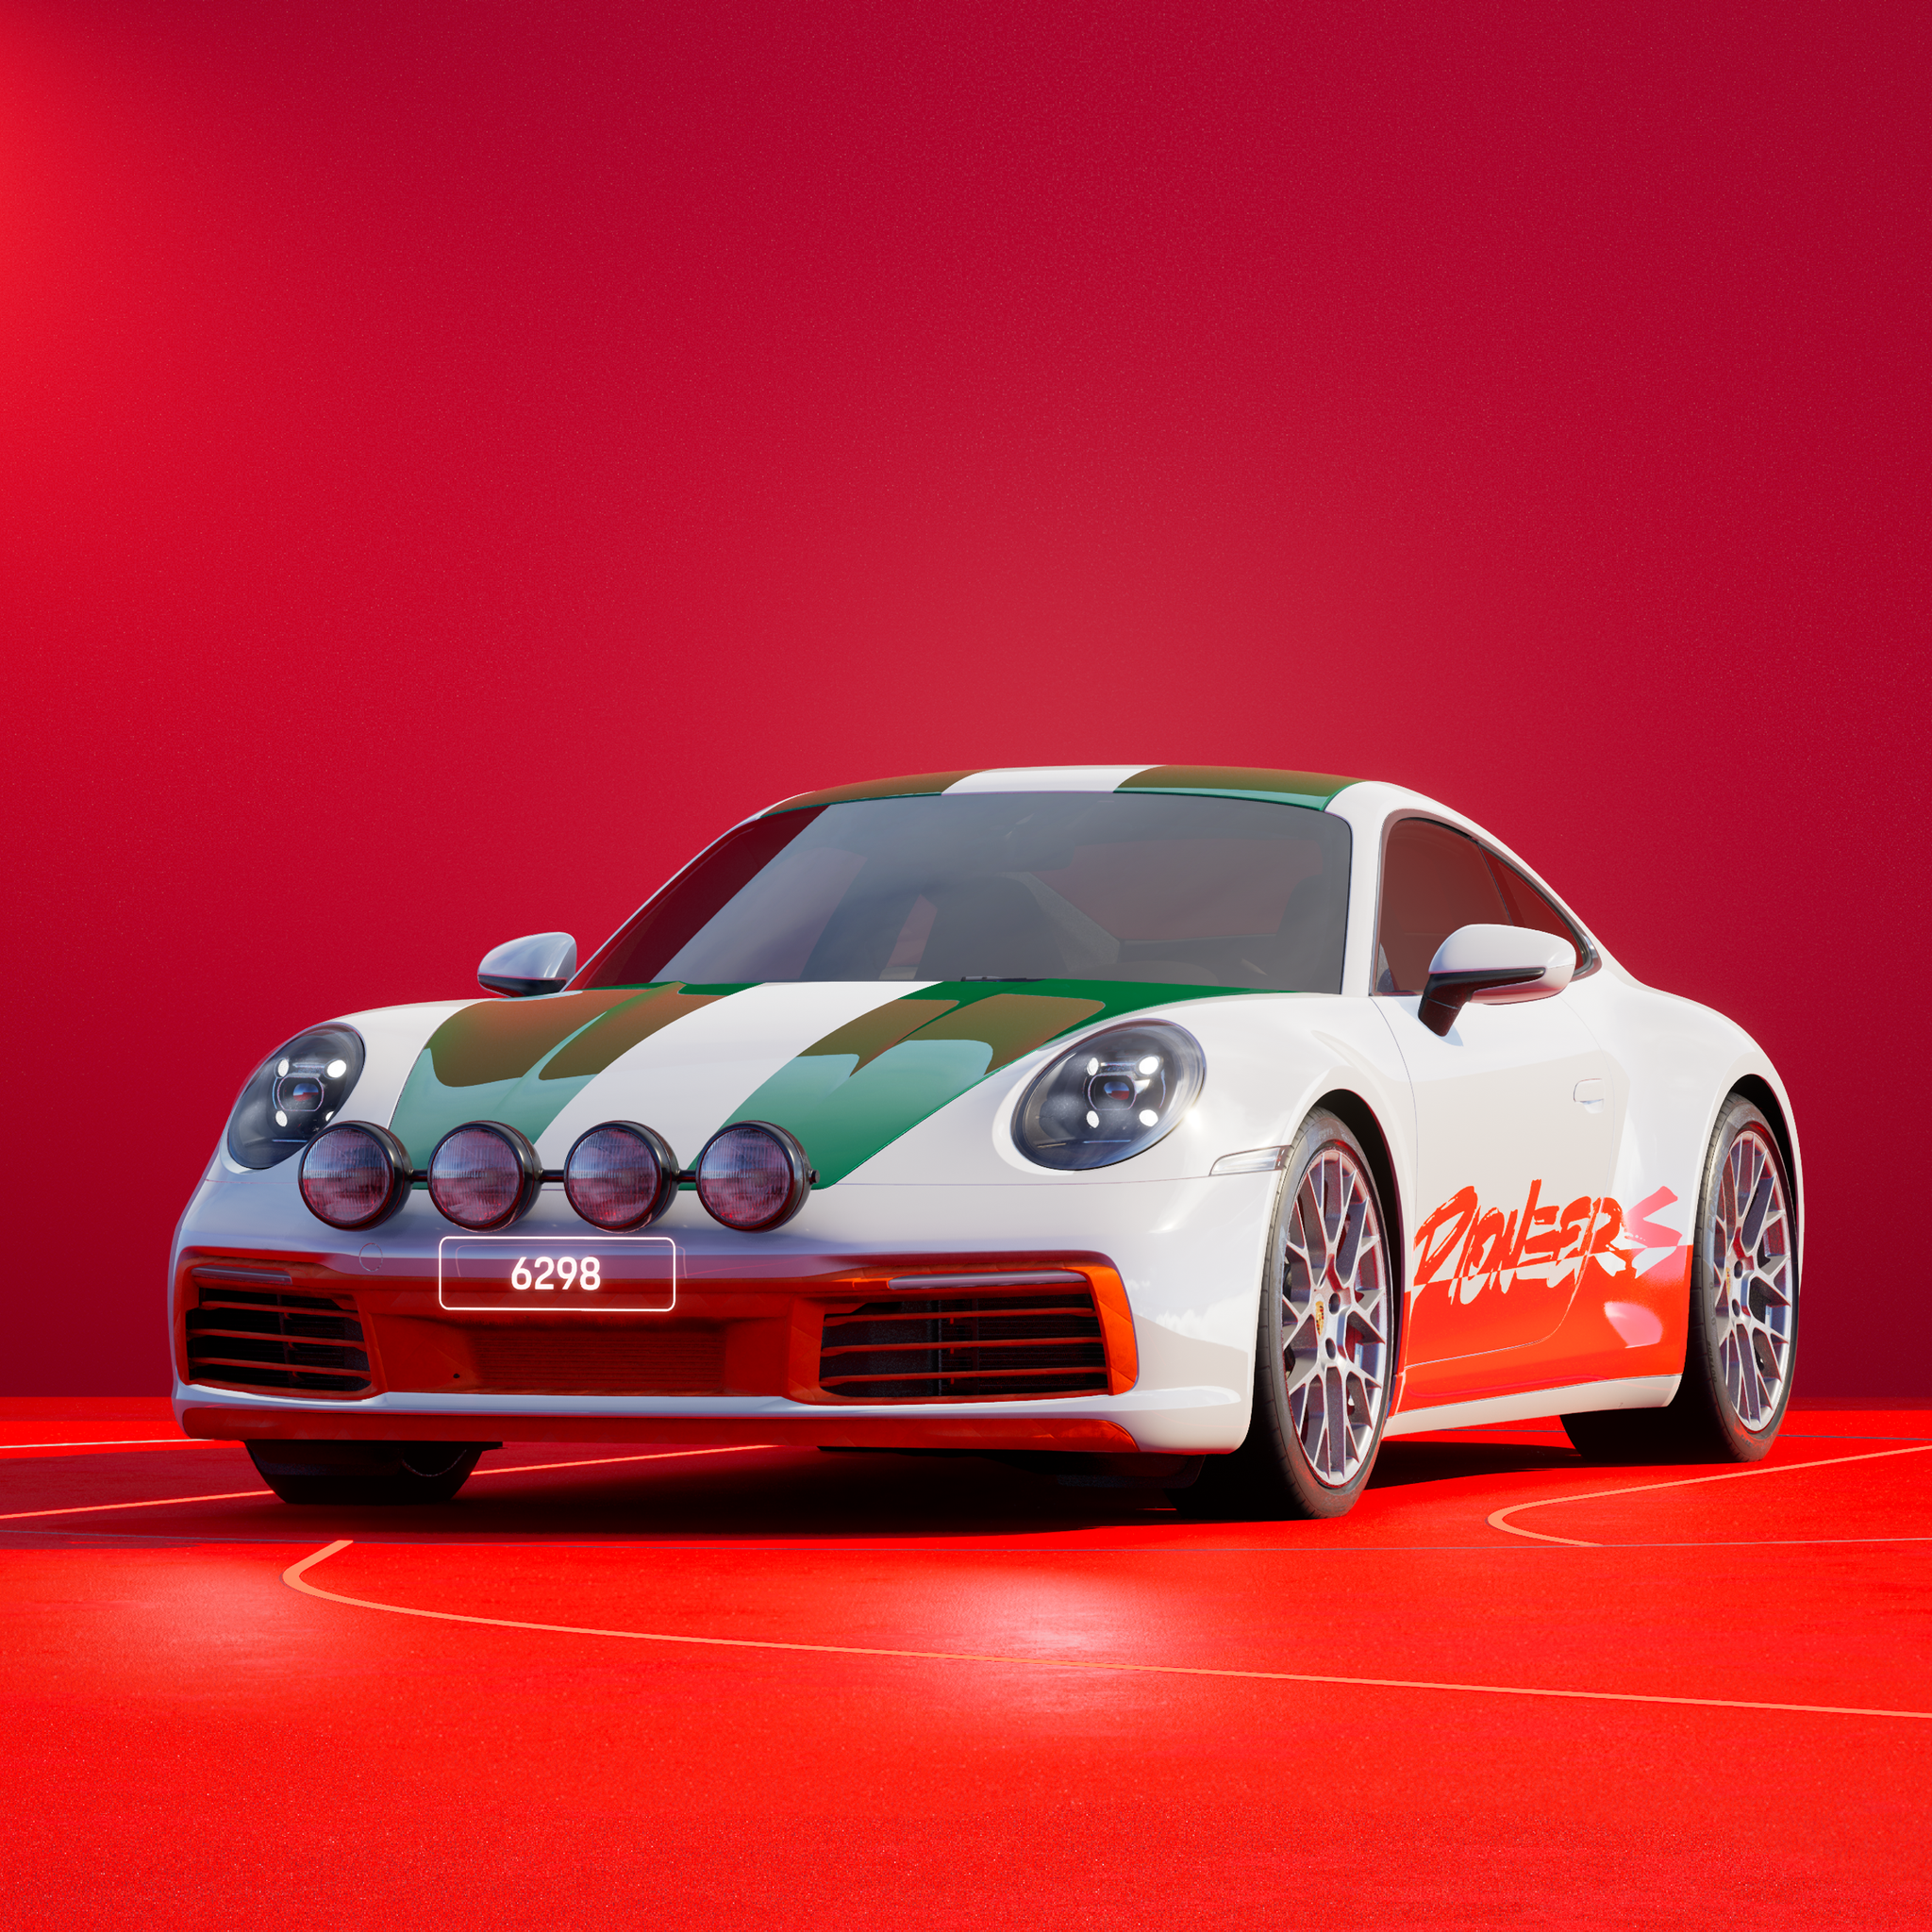 The PORSCHΞ 911 6298 image in phase